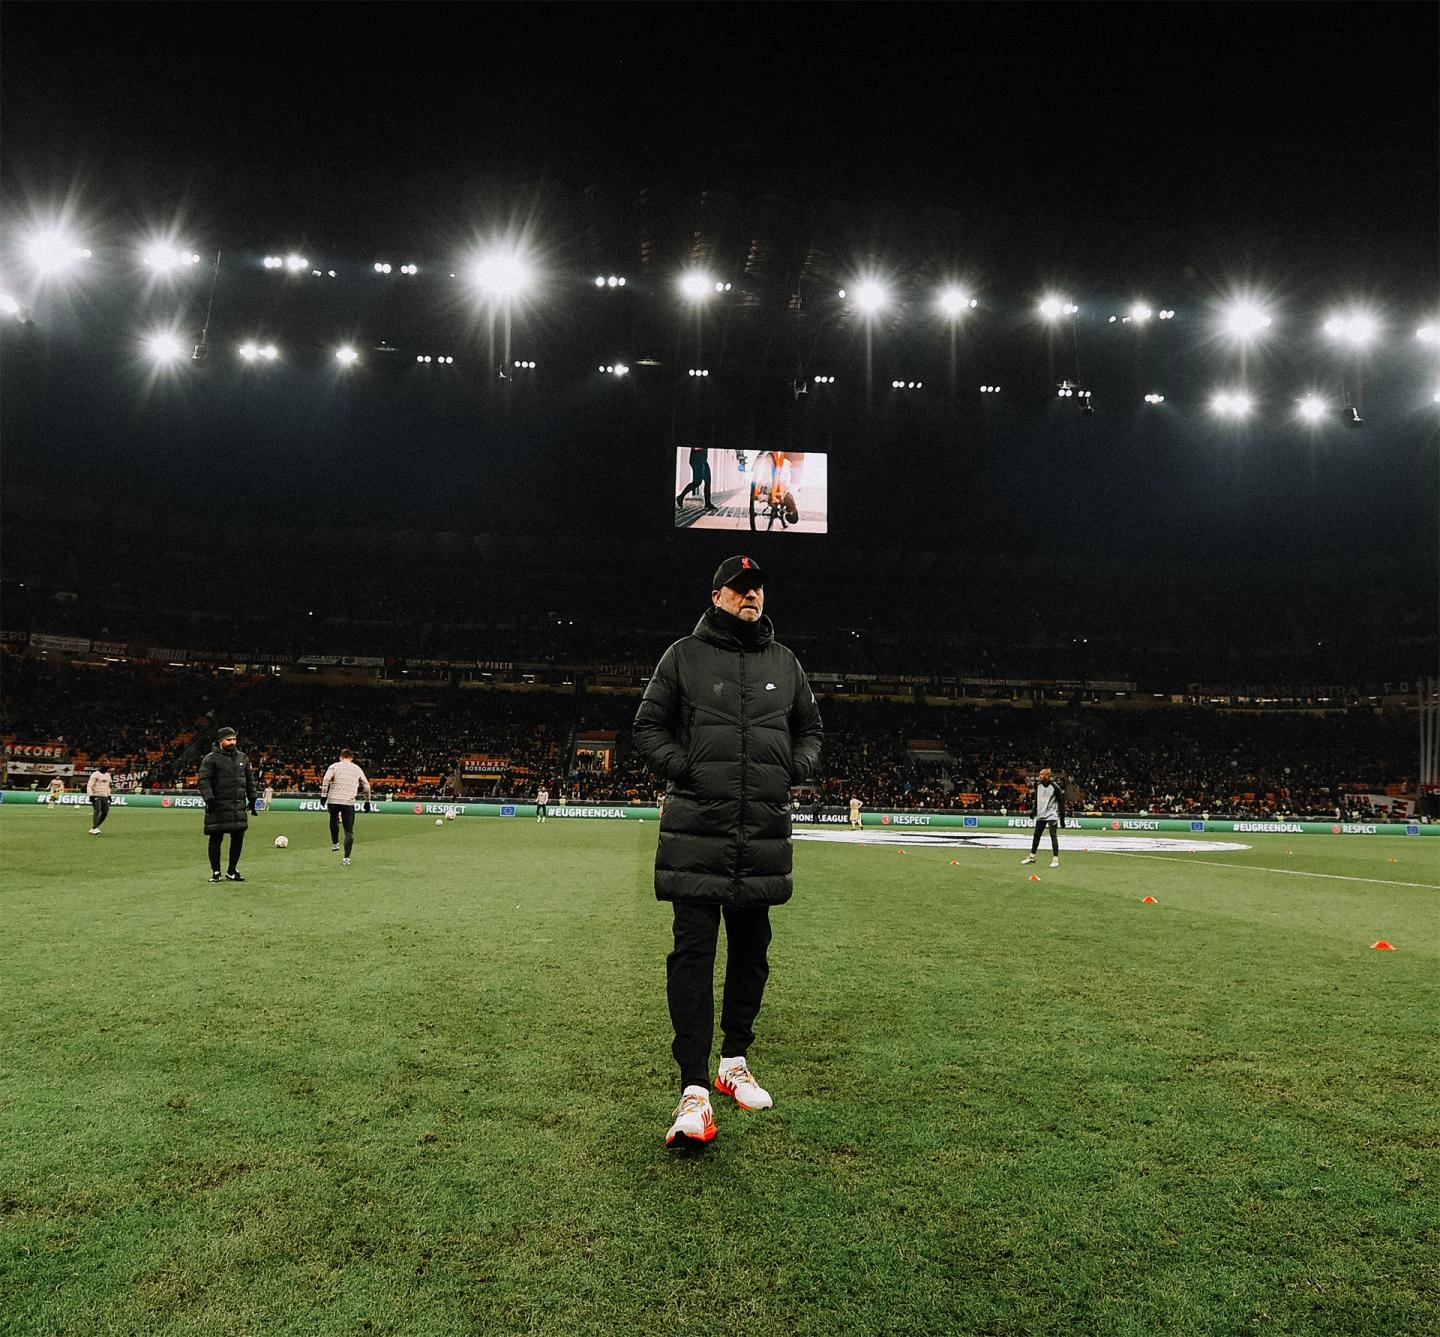 Jürgen Klopp at San Siro prior to Liverpool's clash with AC Milan earlier this month